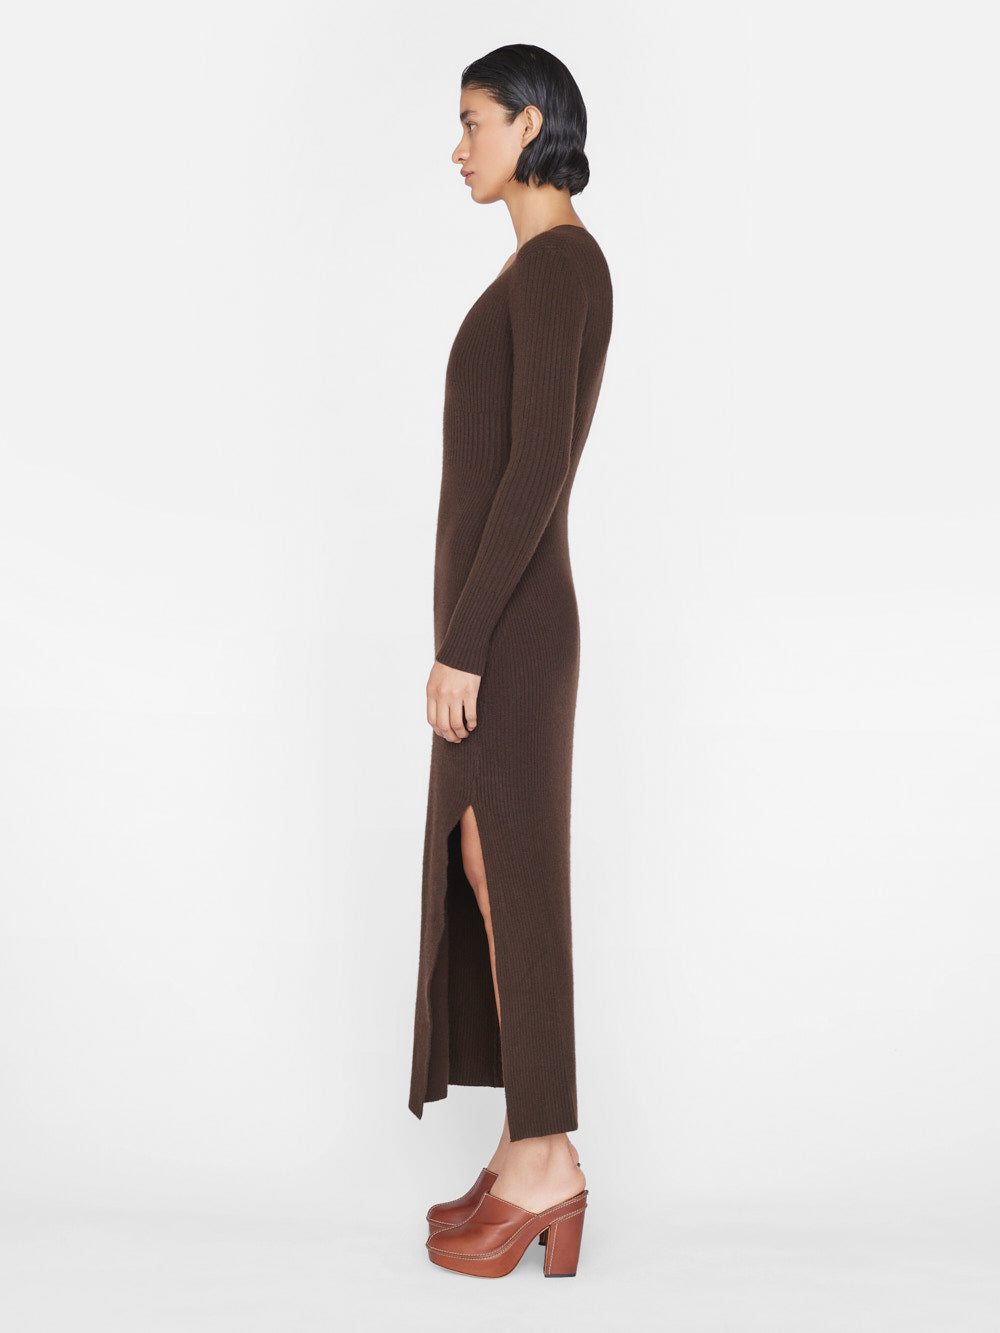 FREYA cashmere ribbed knit flare pant in espresso